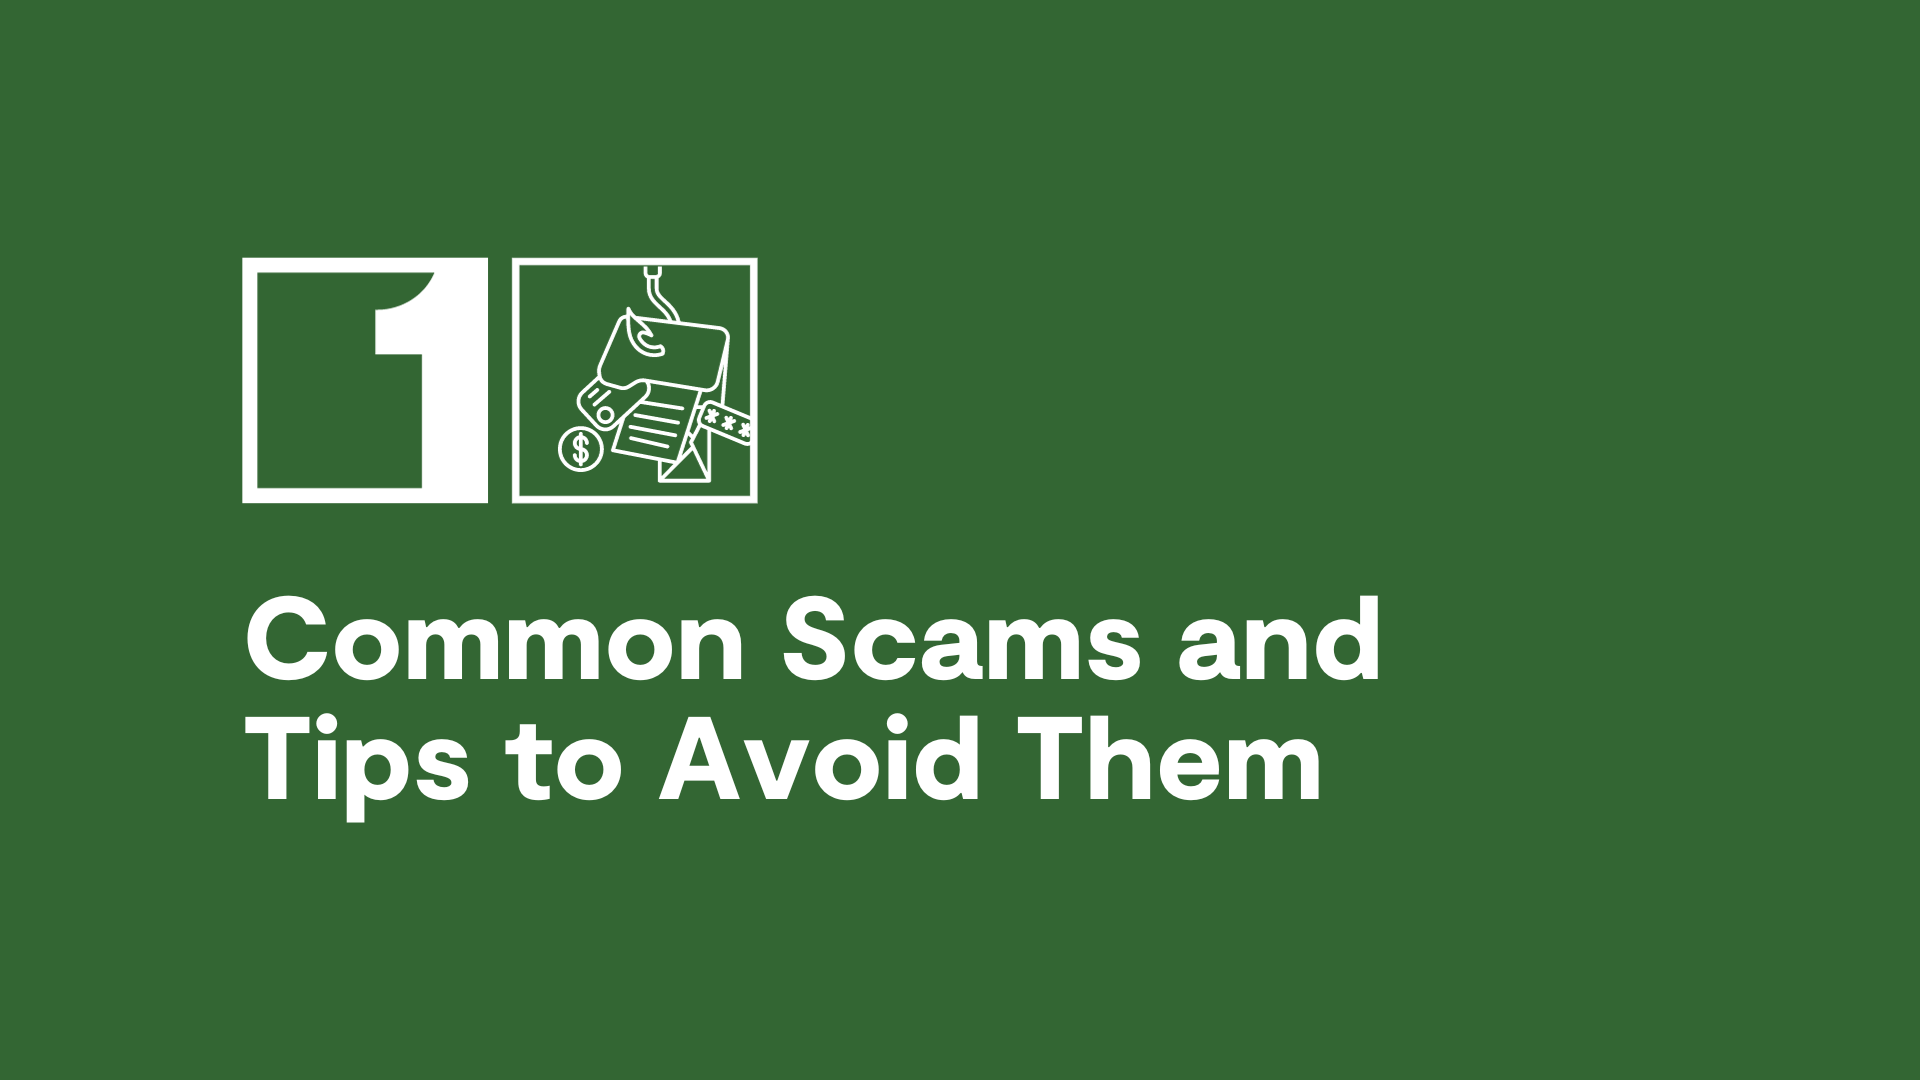 Common Scams and Tips to Avoid Them